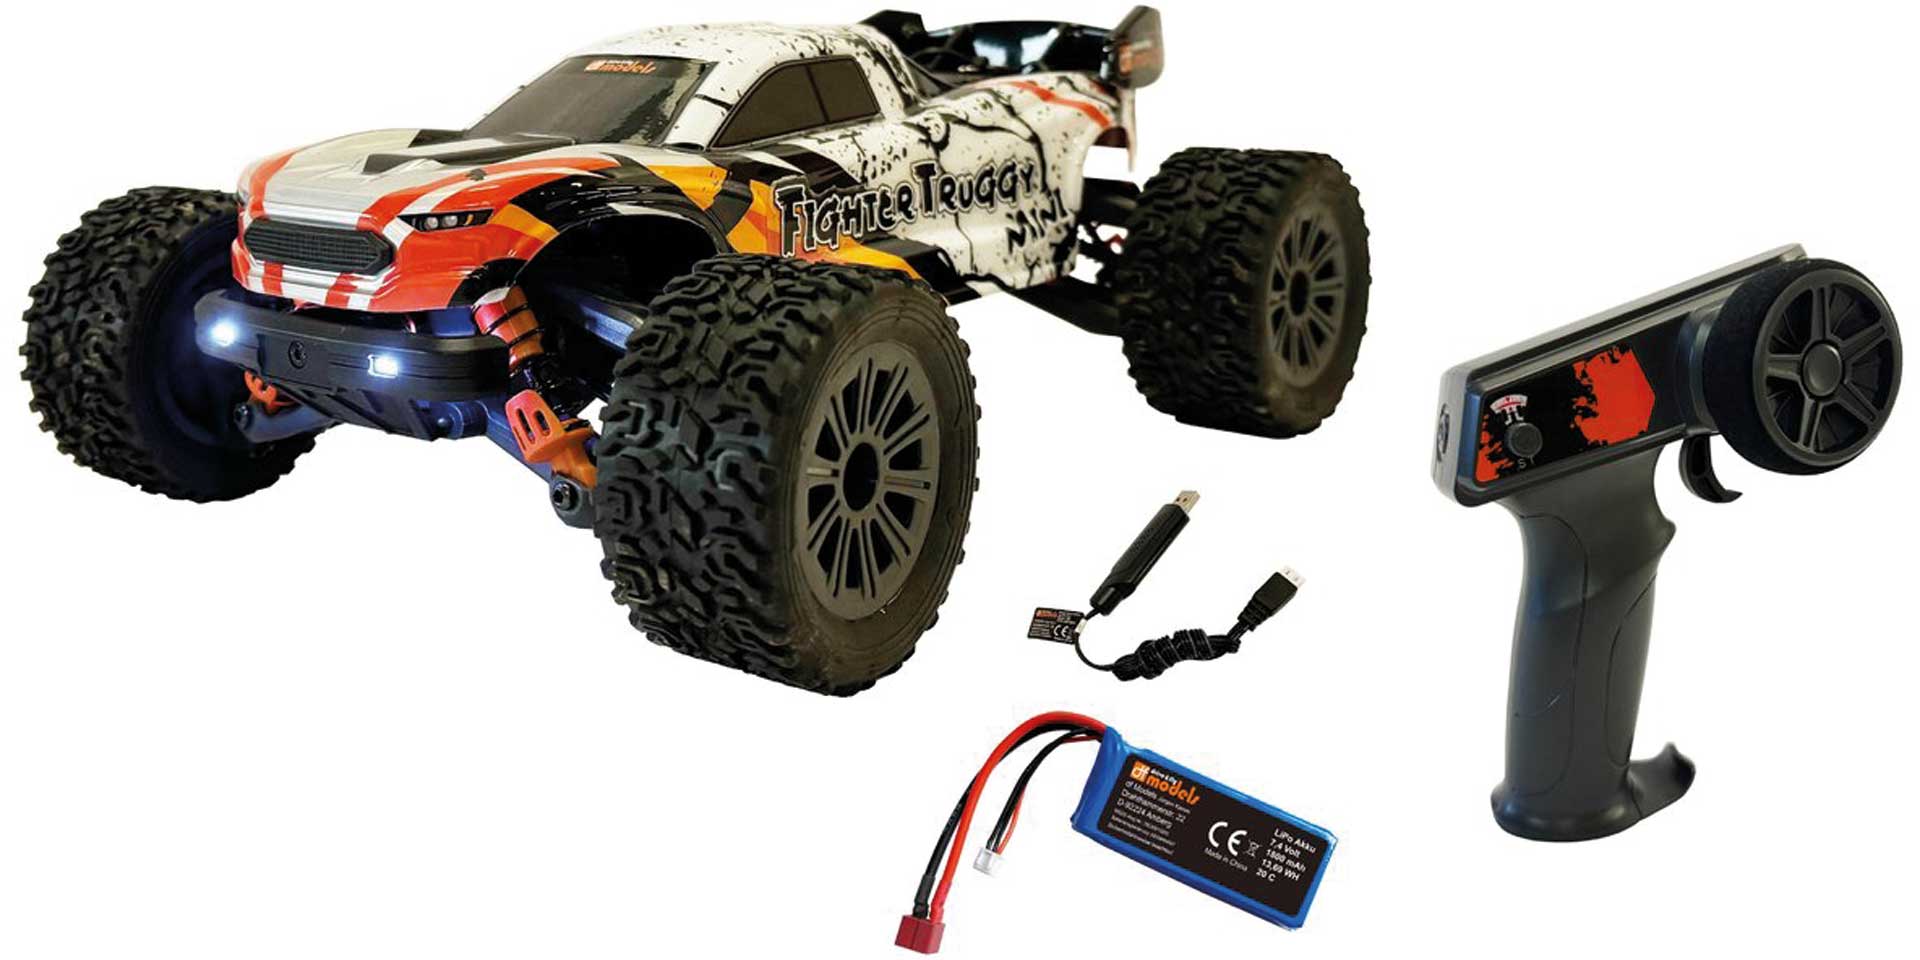 DRIVE & FLY MODELS FighterTruggy Mini 1/16 Truggy 4WD RTR